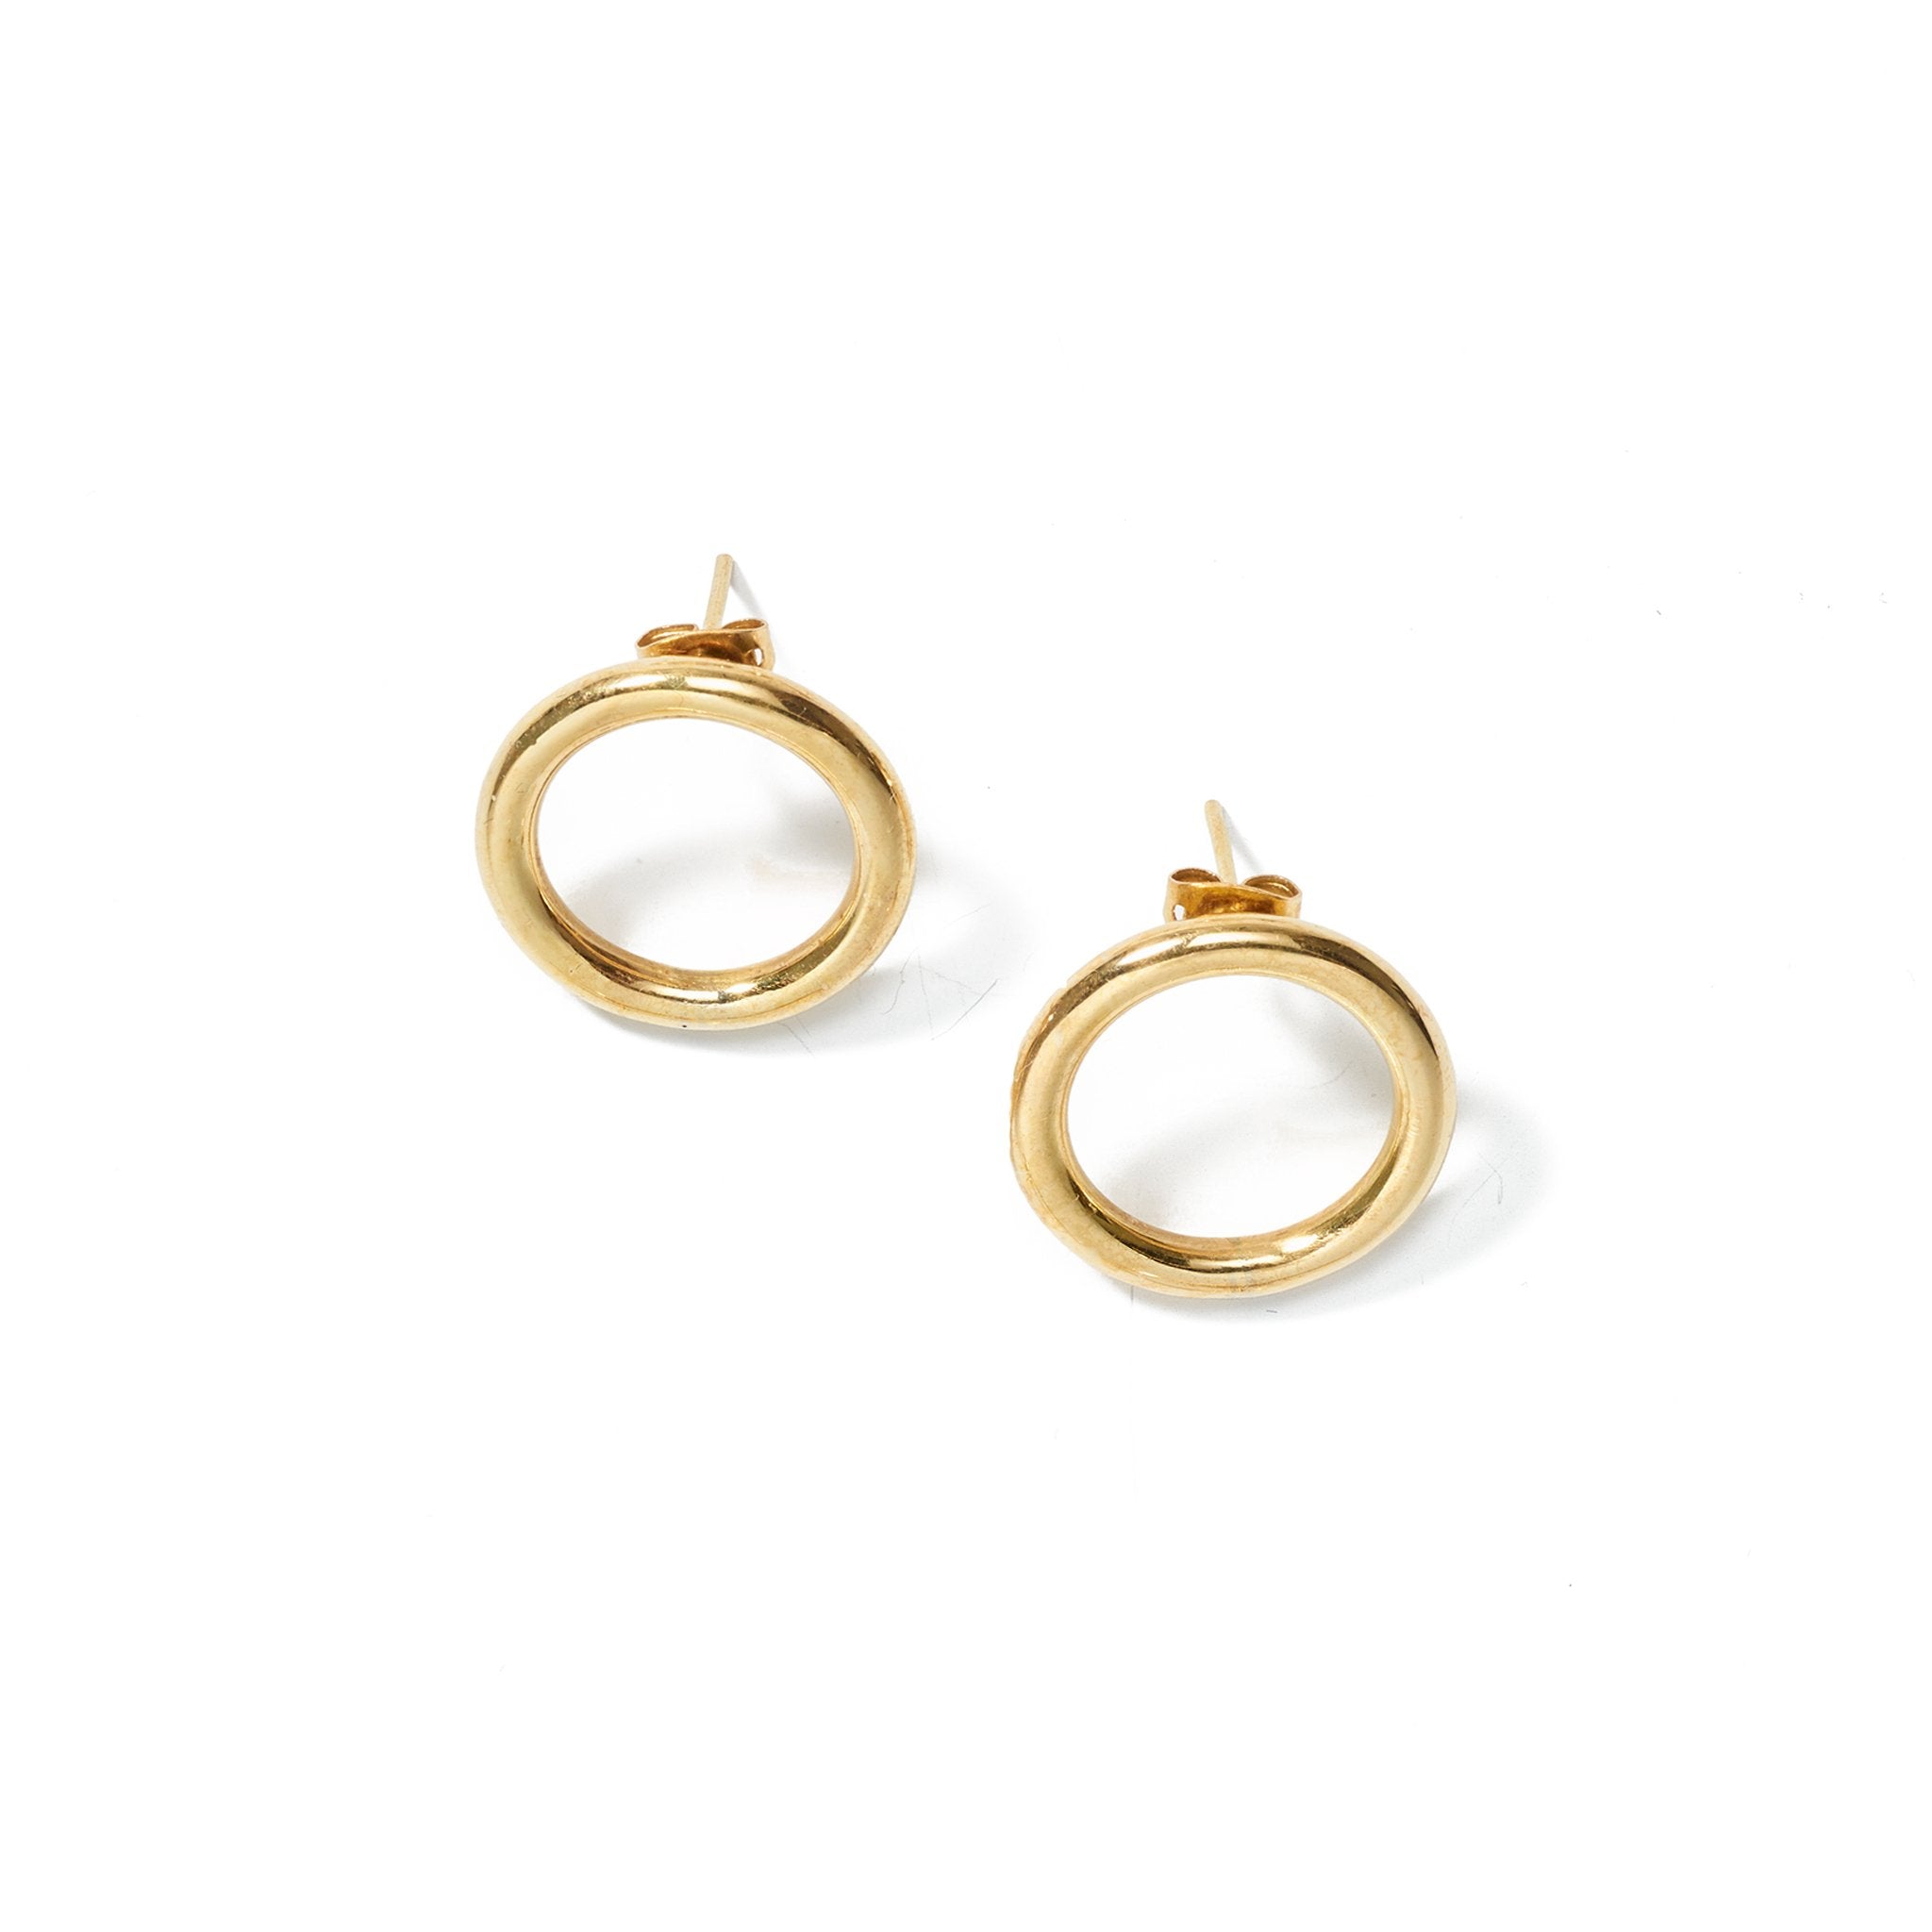 A delicate yet playful hoop earring that site parallel to ear, handcrafted from upcycled brass.